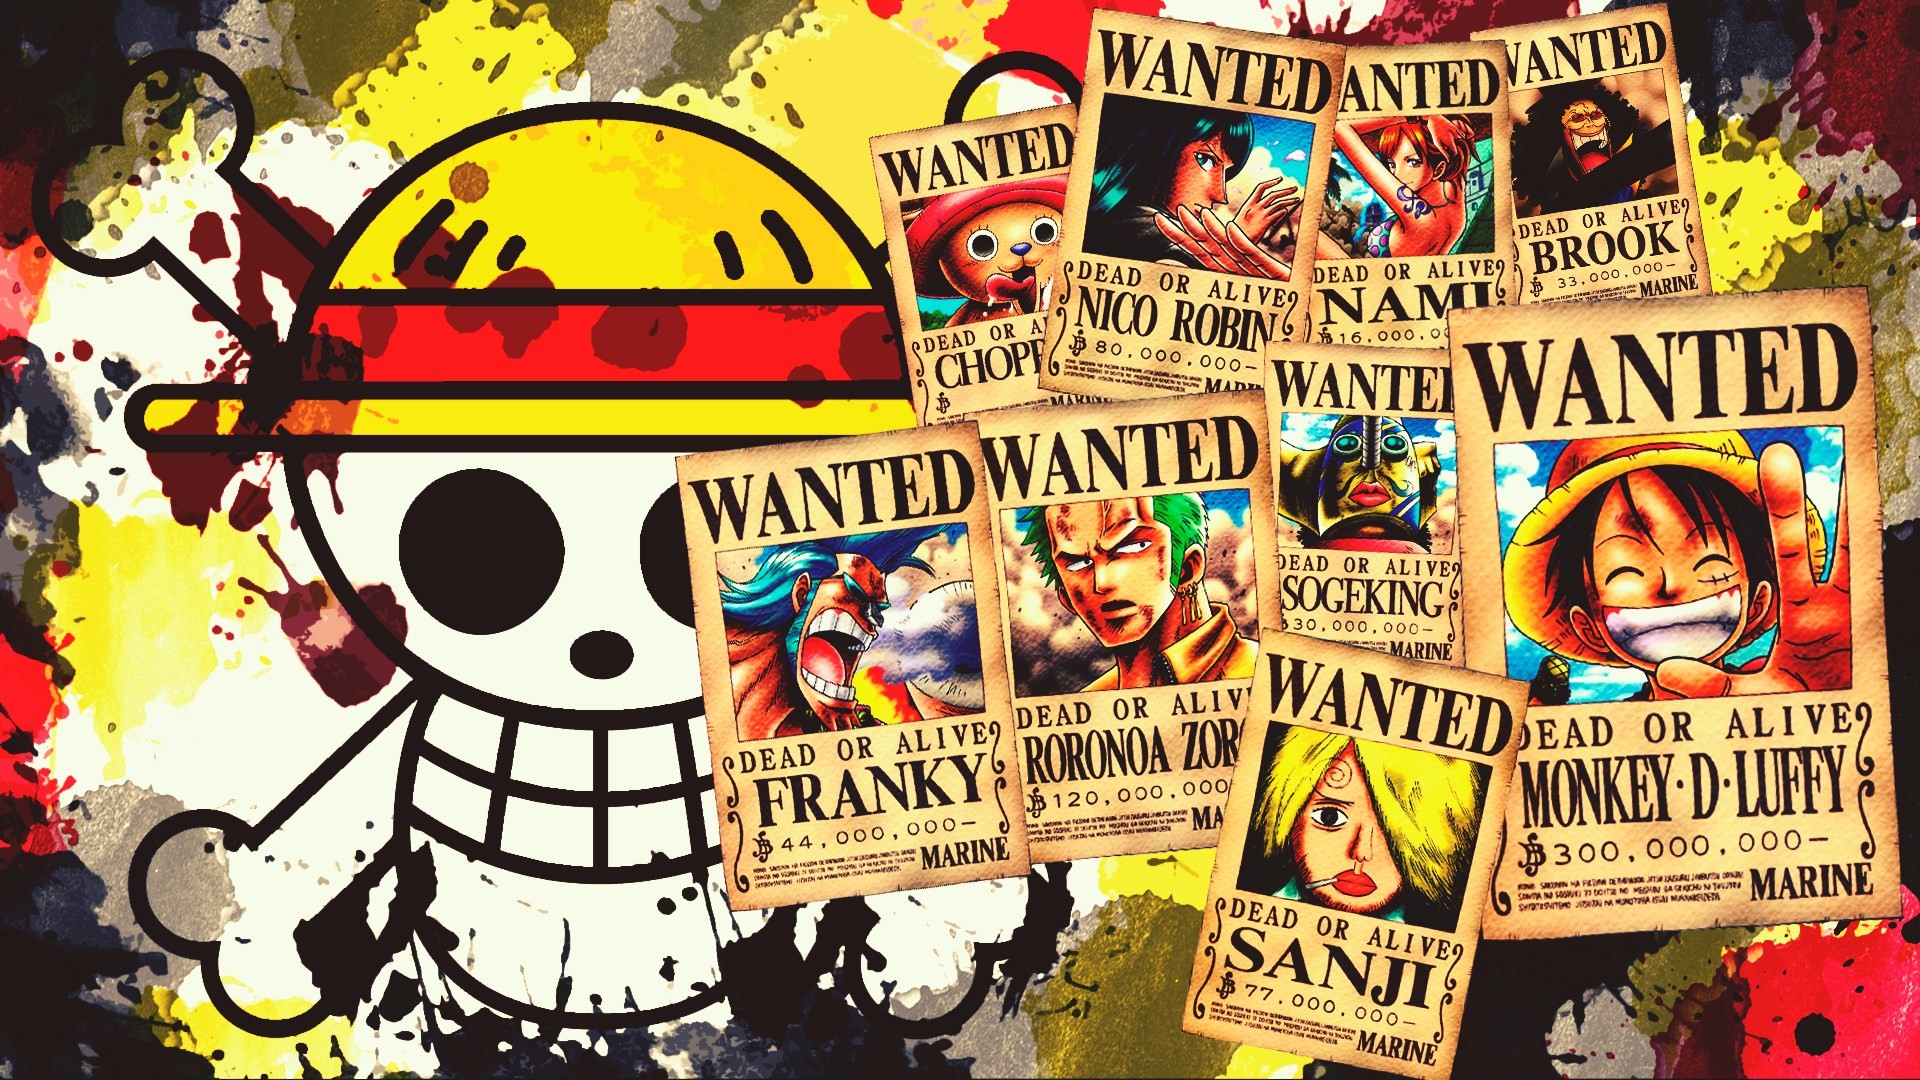 1920x1080 one piece backround - Full HD Wallpapers, Photos, Franklin Walls 2017-03-